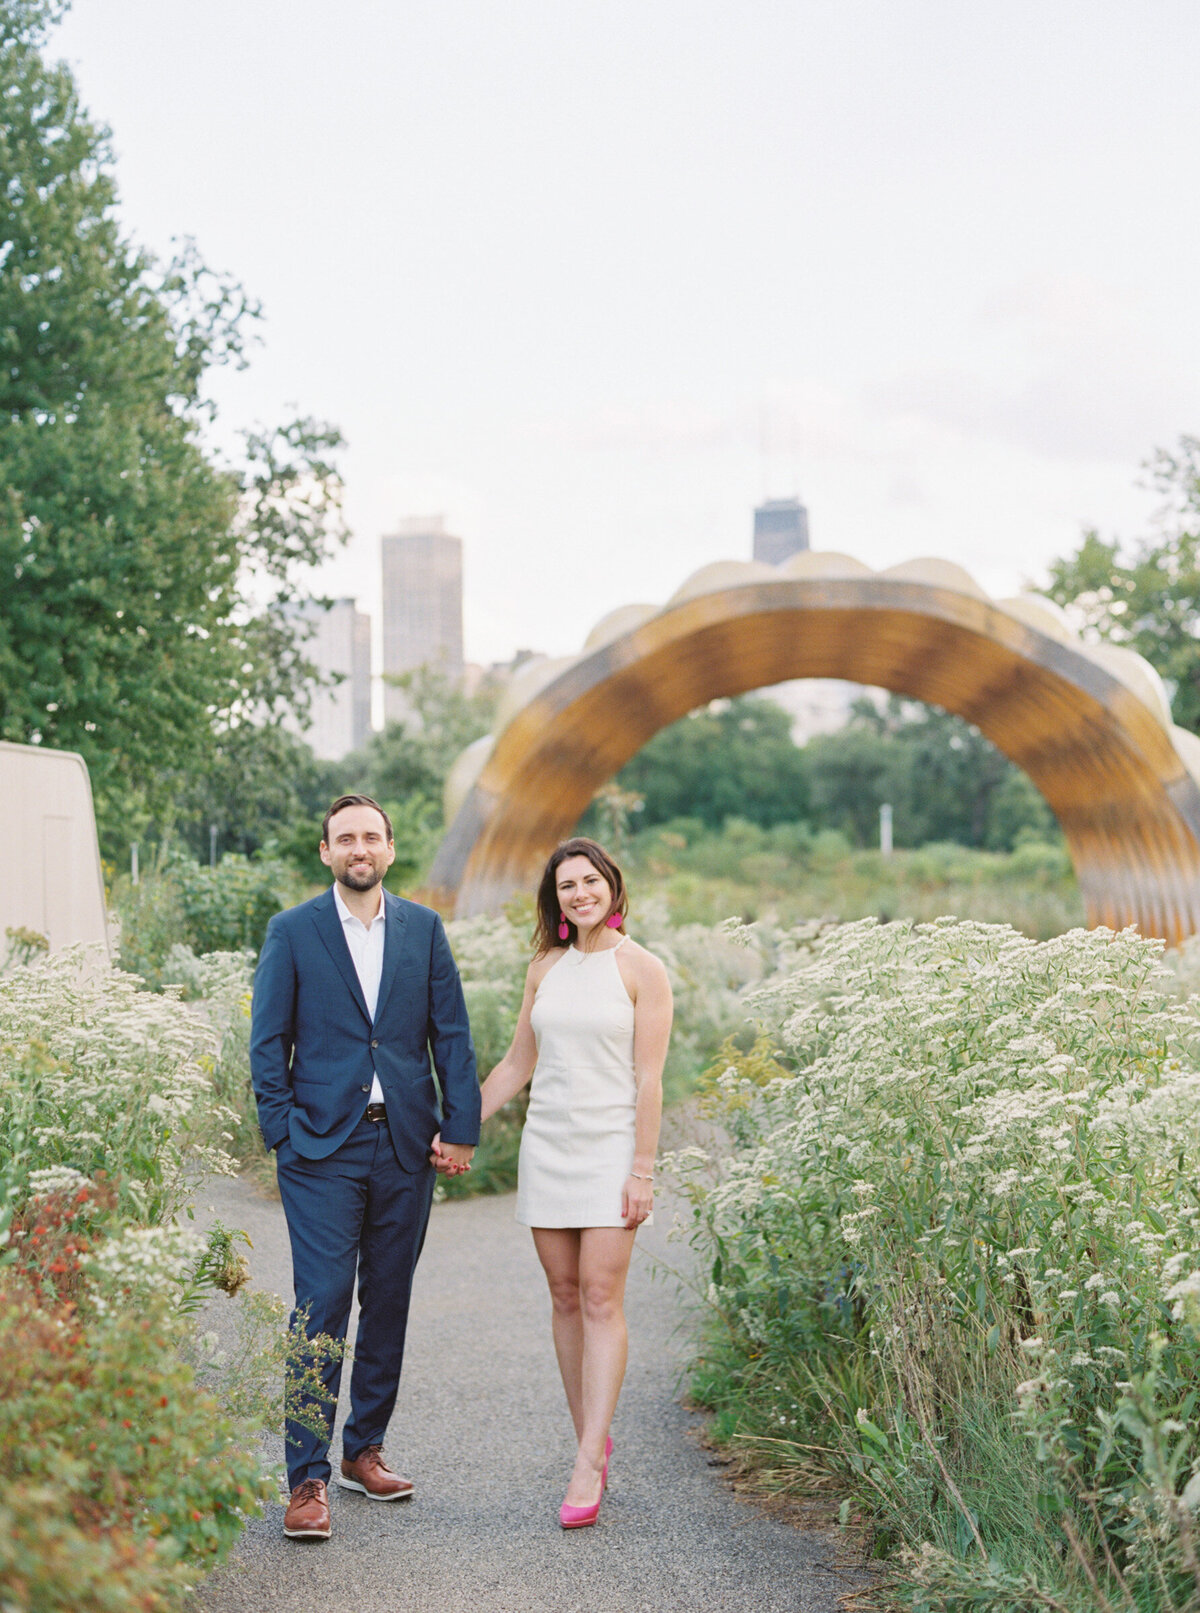 Lincoln Park Chicago Fall Engagement Session Highlights | Amarachi Ikeji Photography 31